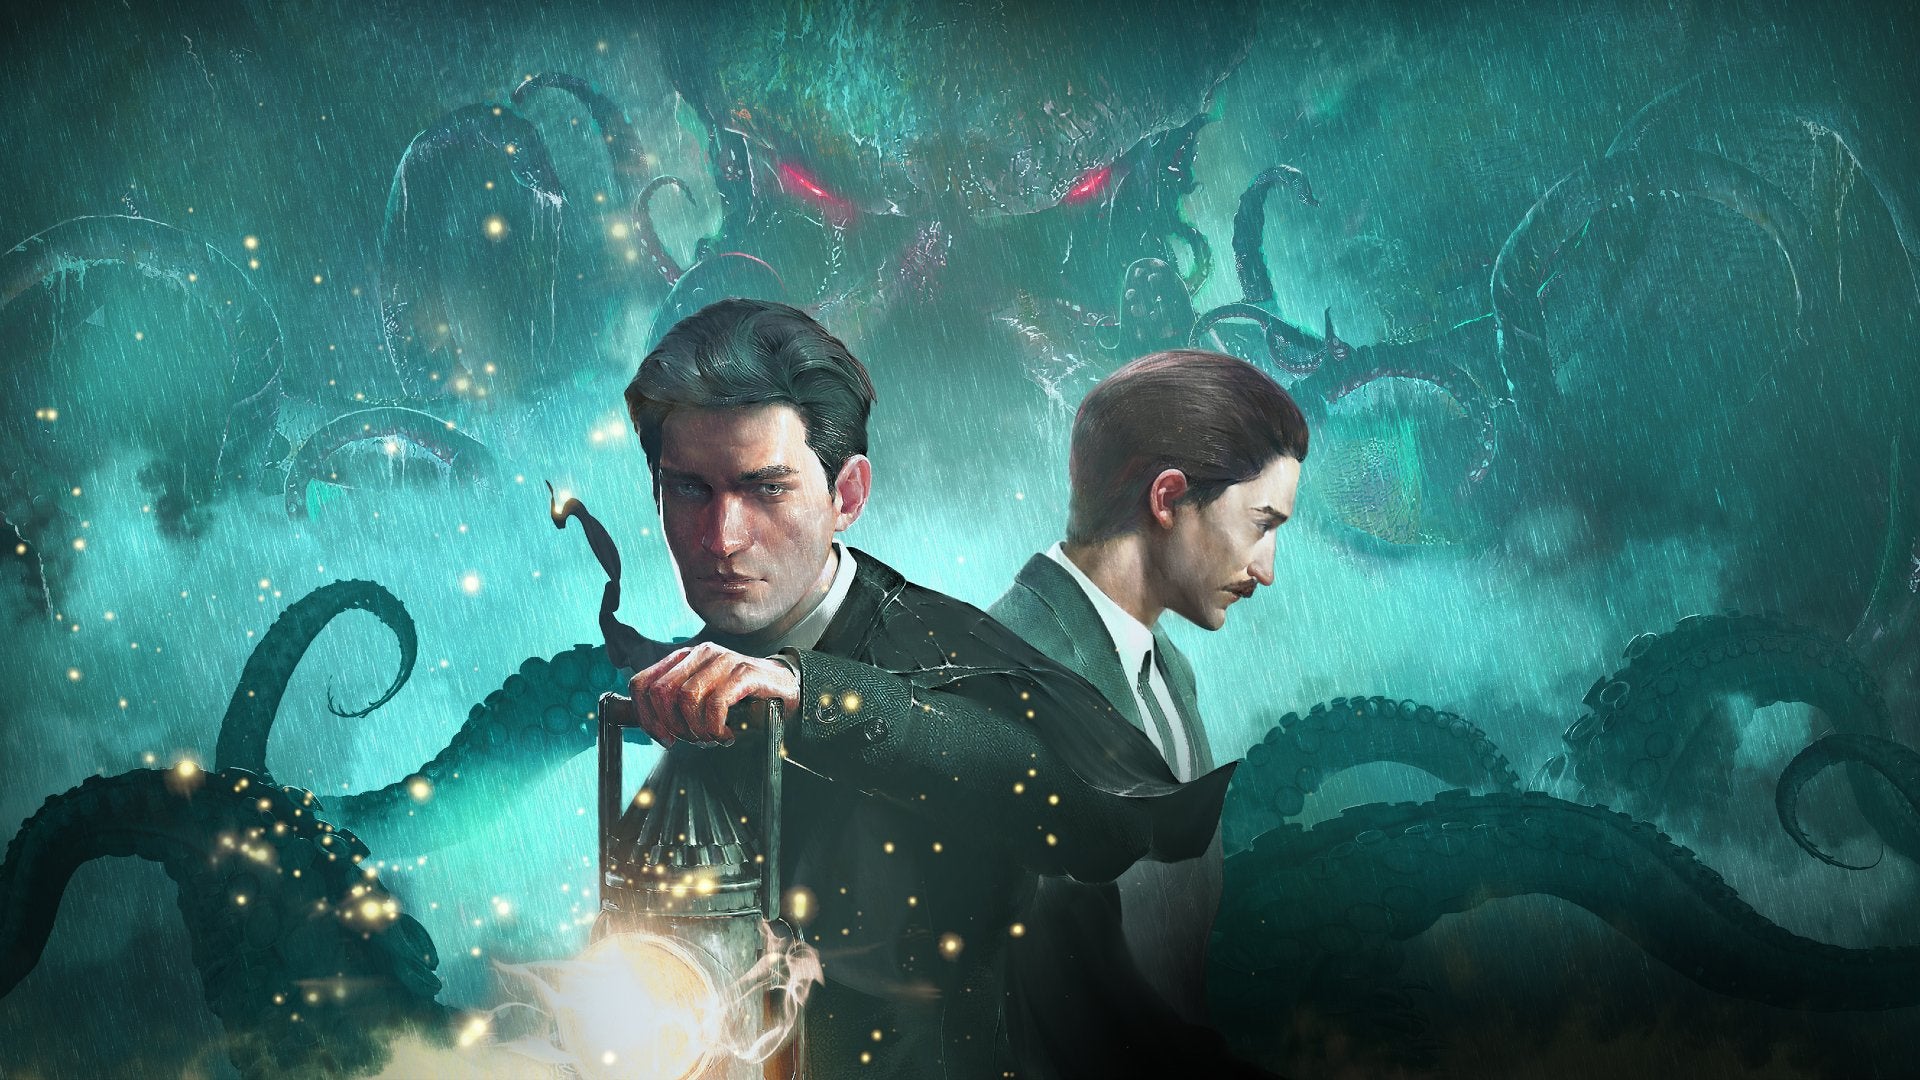 Sherlock Holmes: The Awakened is an upcoming remake of Frogwares' 2007 game of the same name.